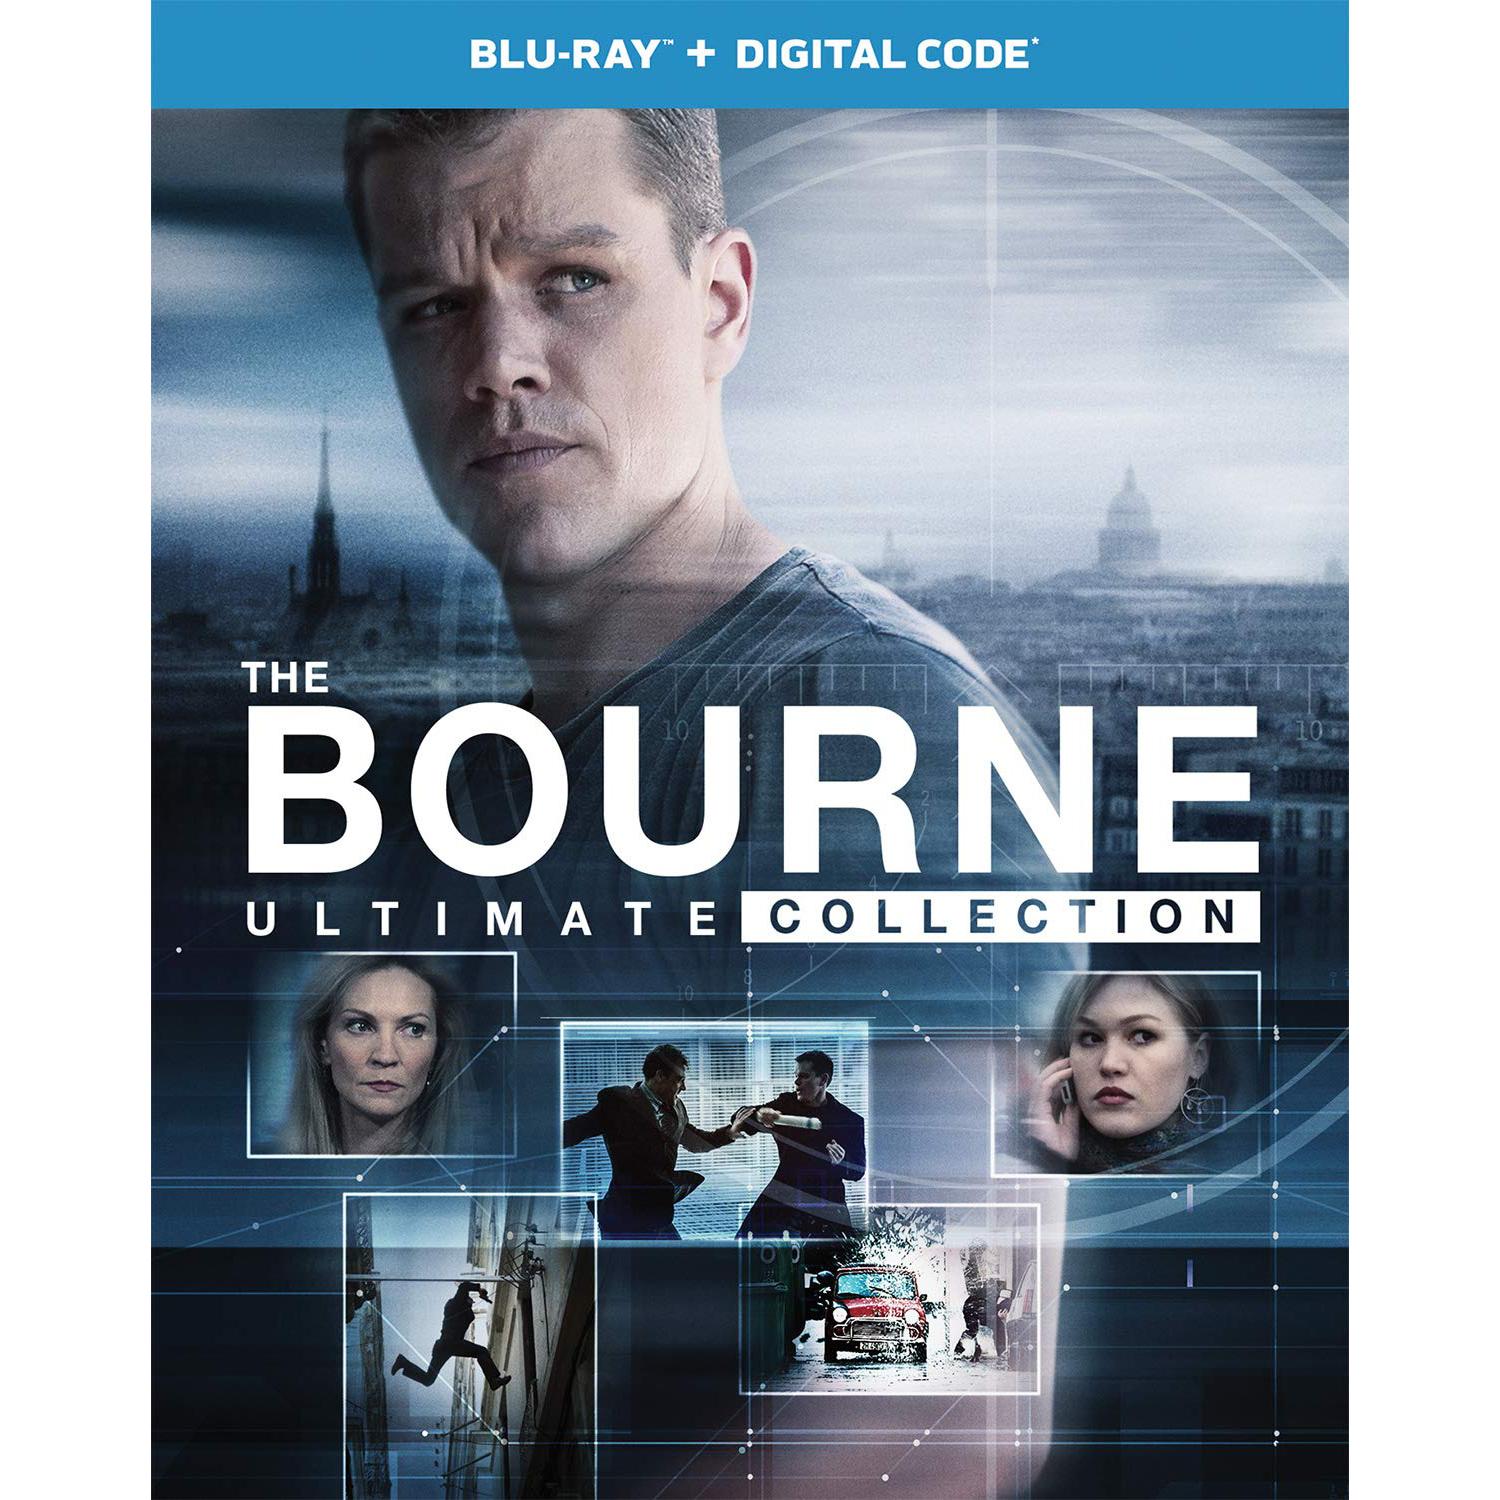 The Bourne Ultimate Collection Blu-ray + Digital for $19.99 Shipped